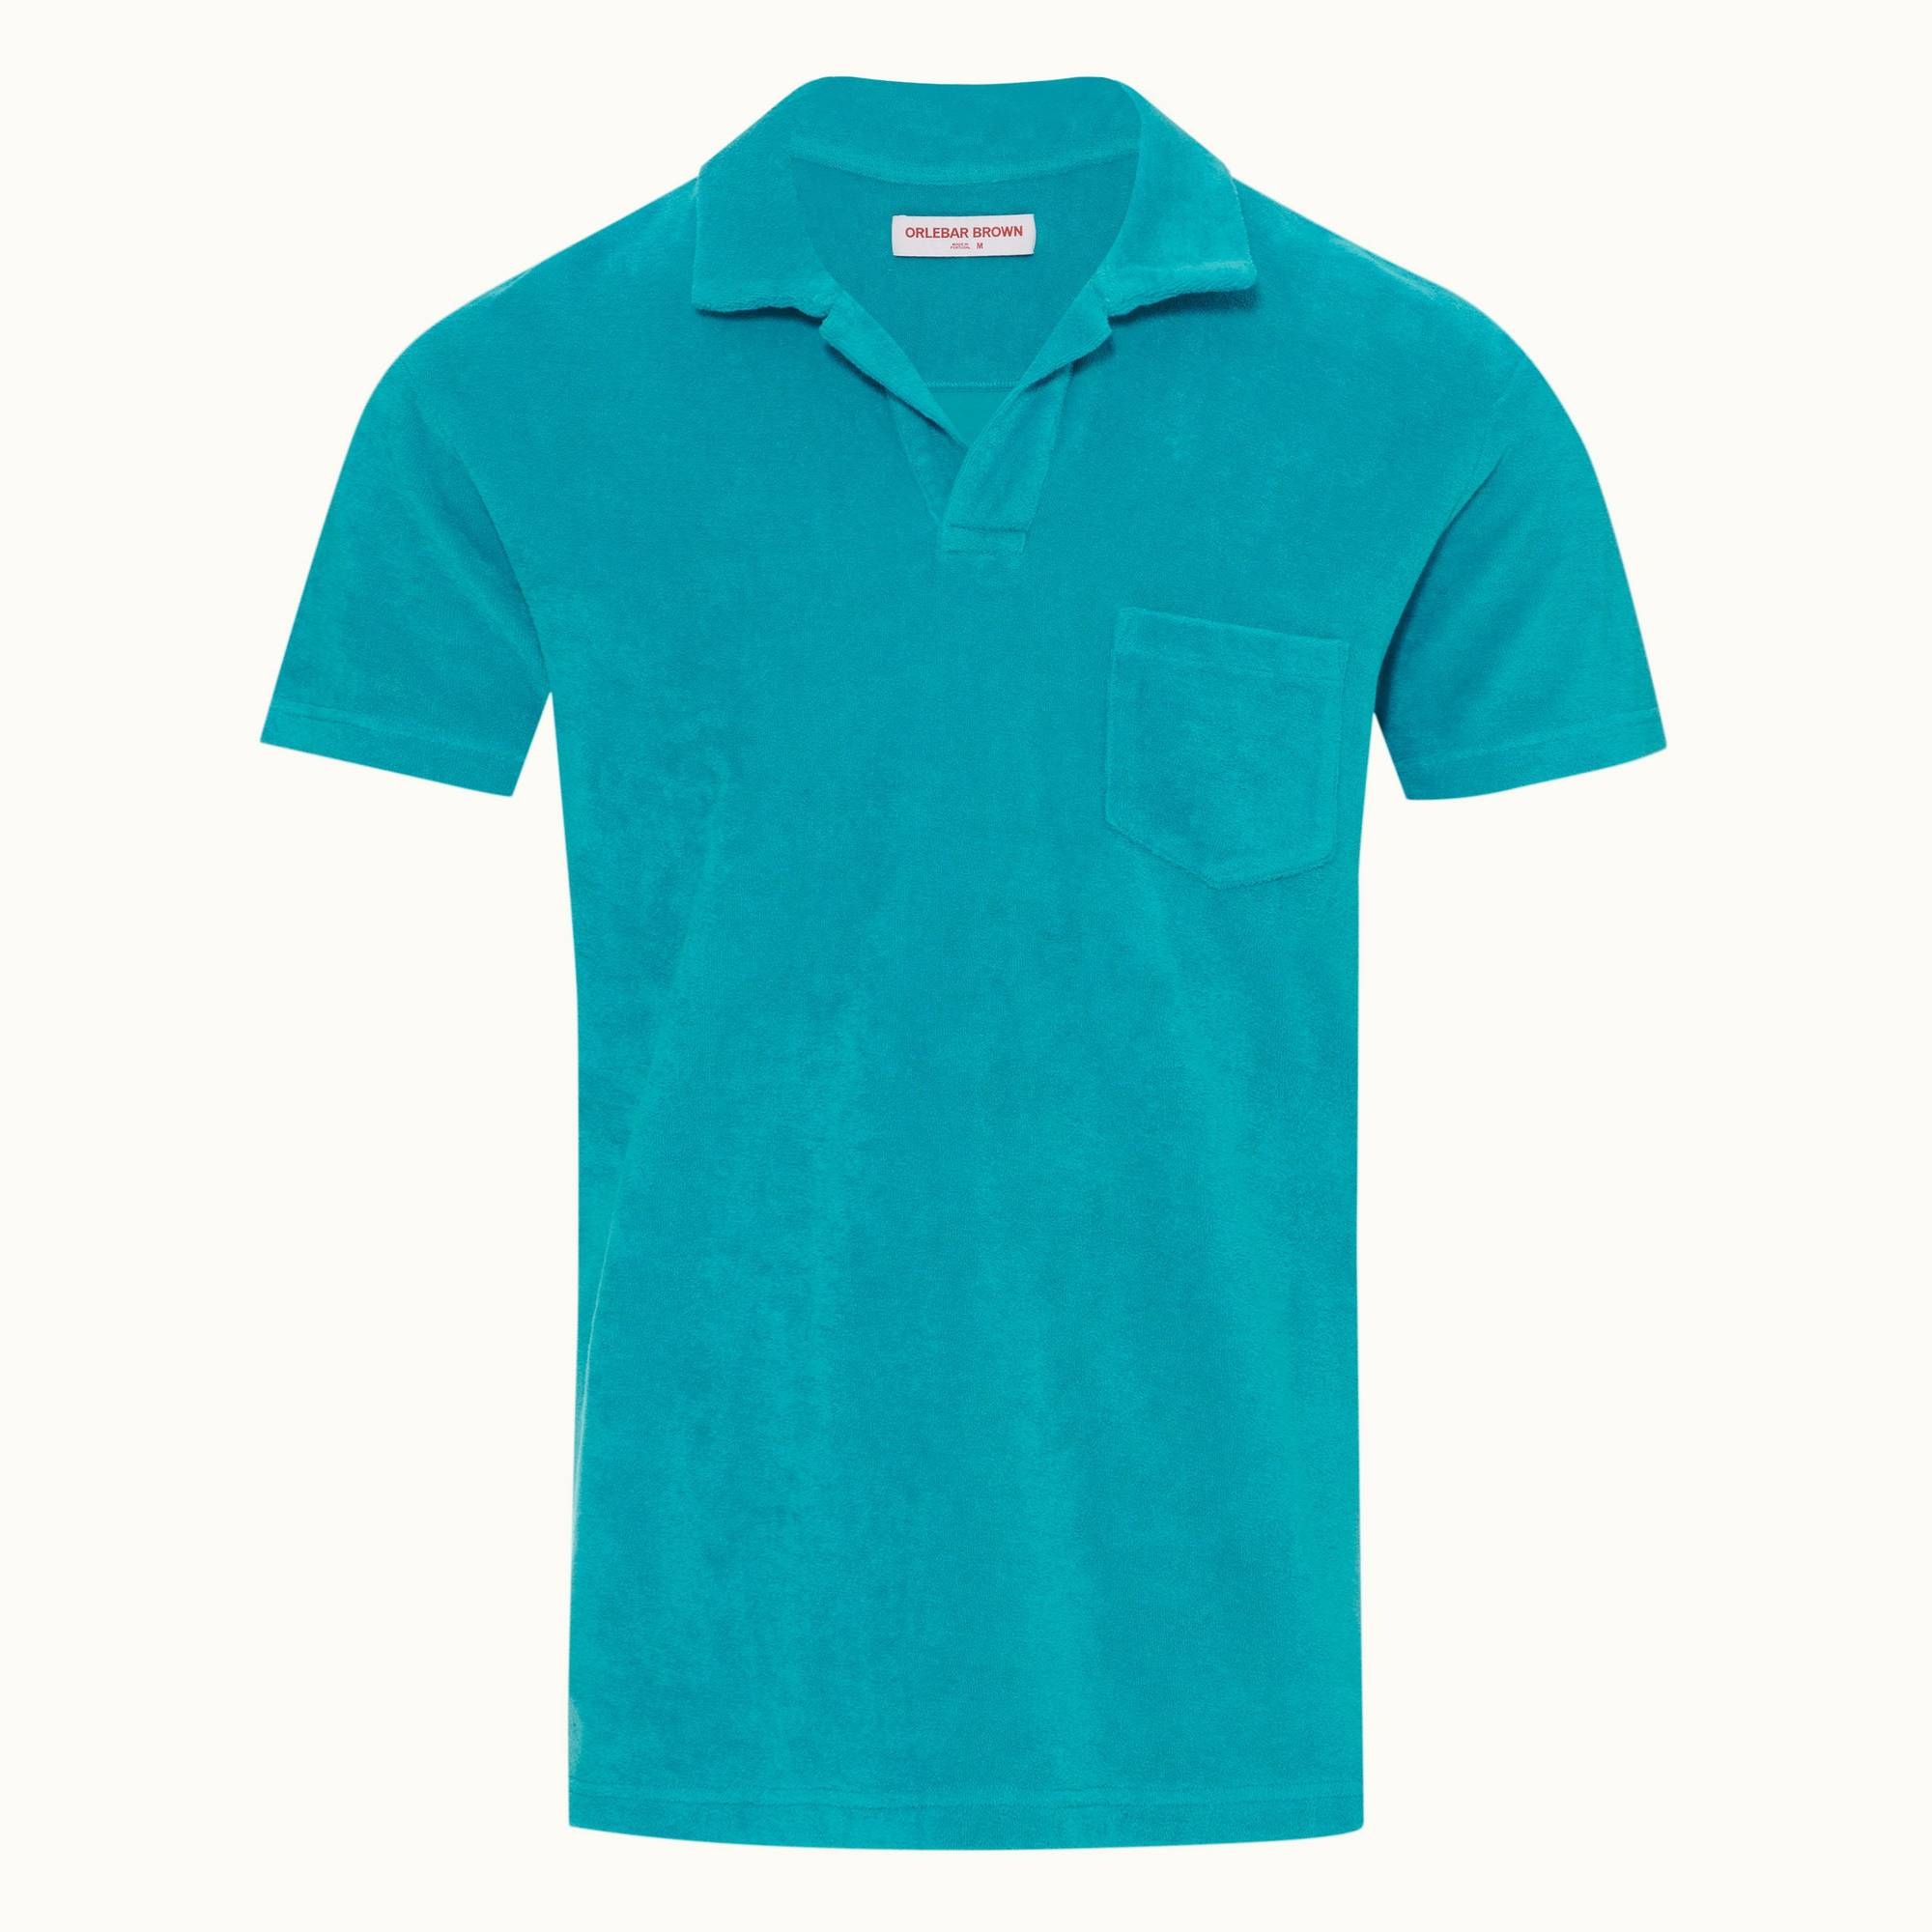 Terry Towelling - Mens Crystal Sea Tailored Fit Resort Towelling Polo Shirt